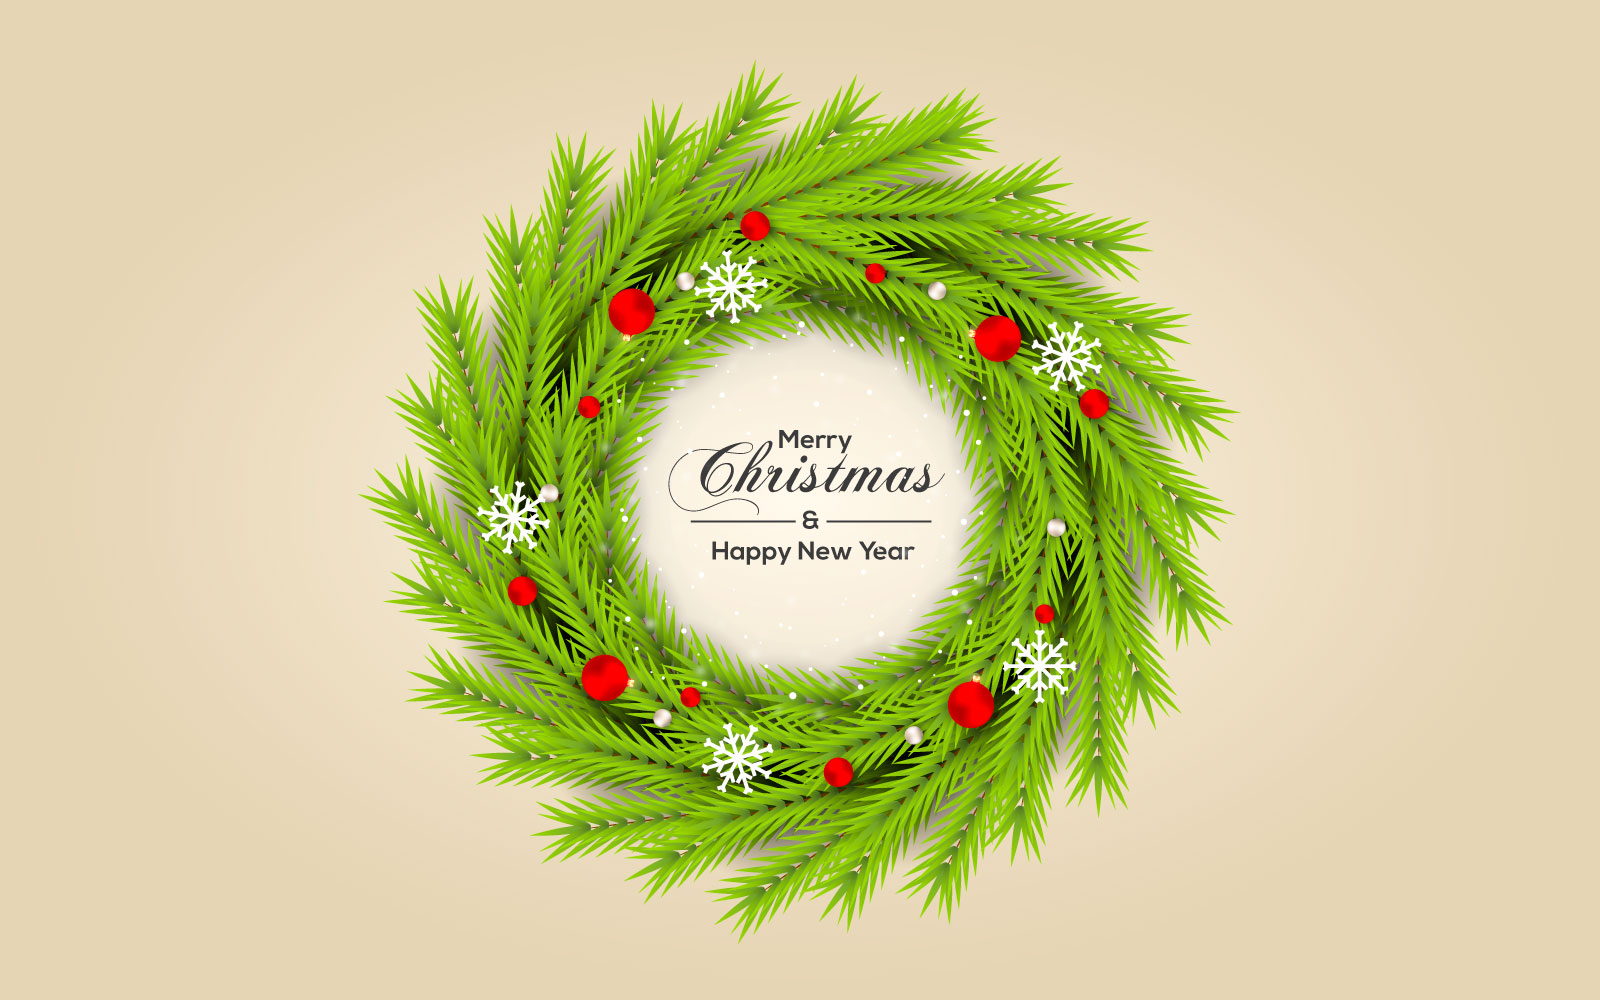 Christmas wreath vector concept design. merry christmas text in grass wreath element with leaves.